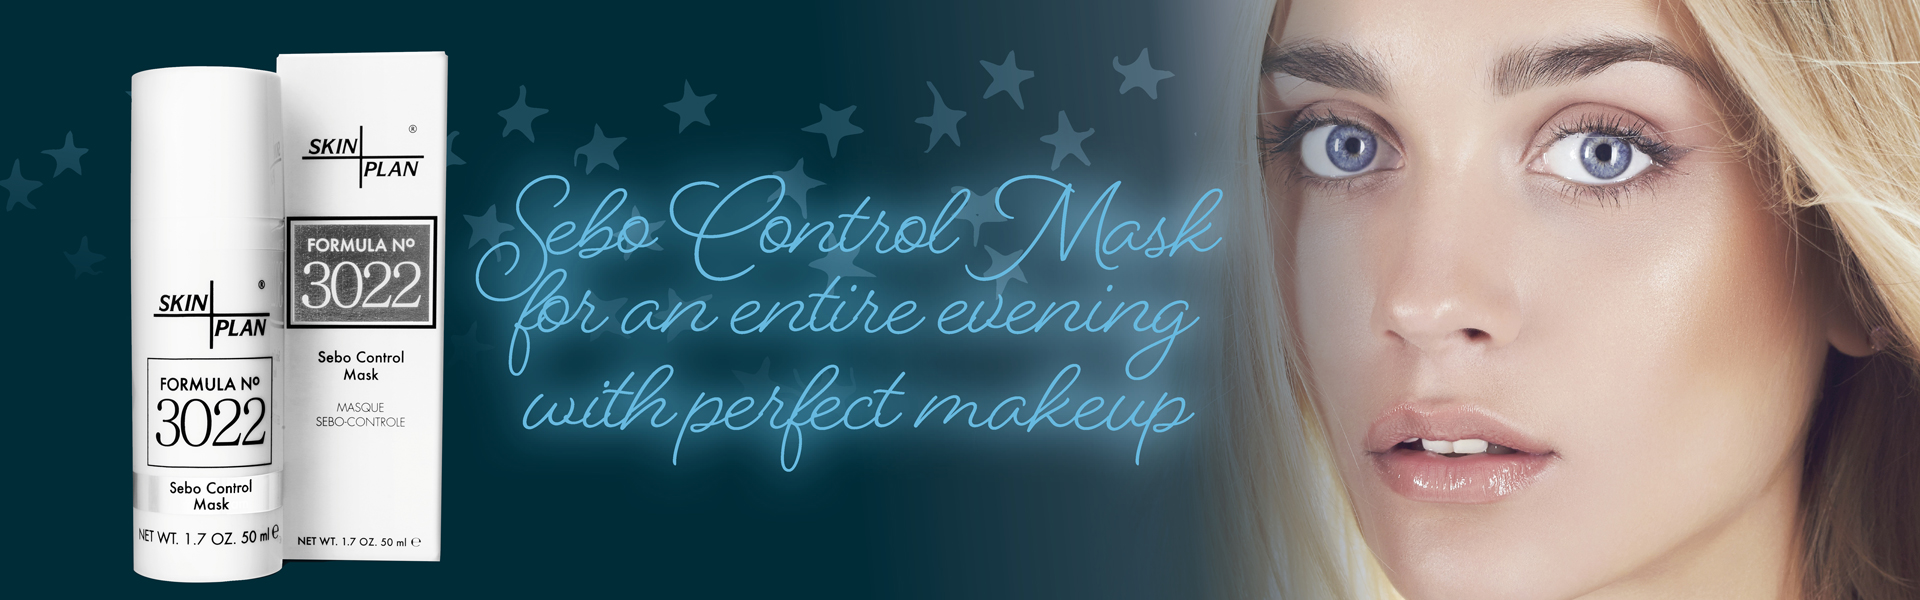 Sebo Control Mask for an entire evening with perfect makeup